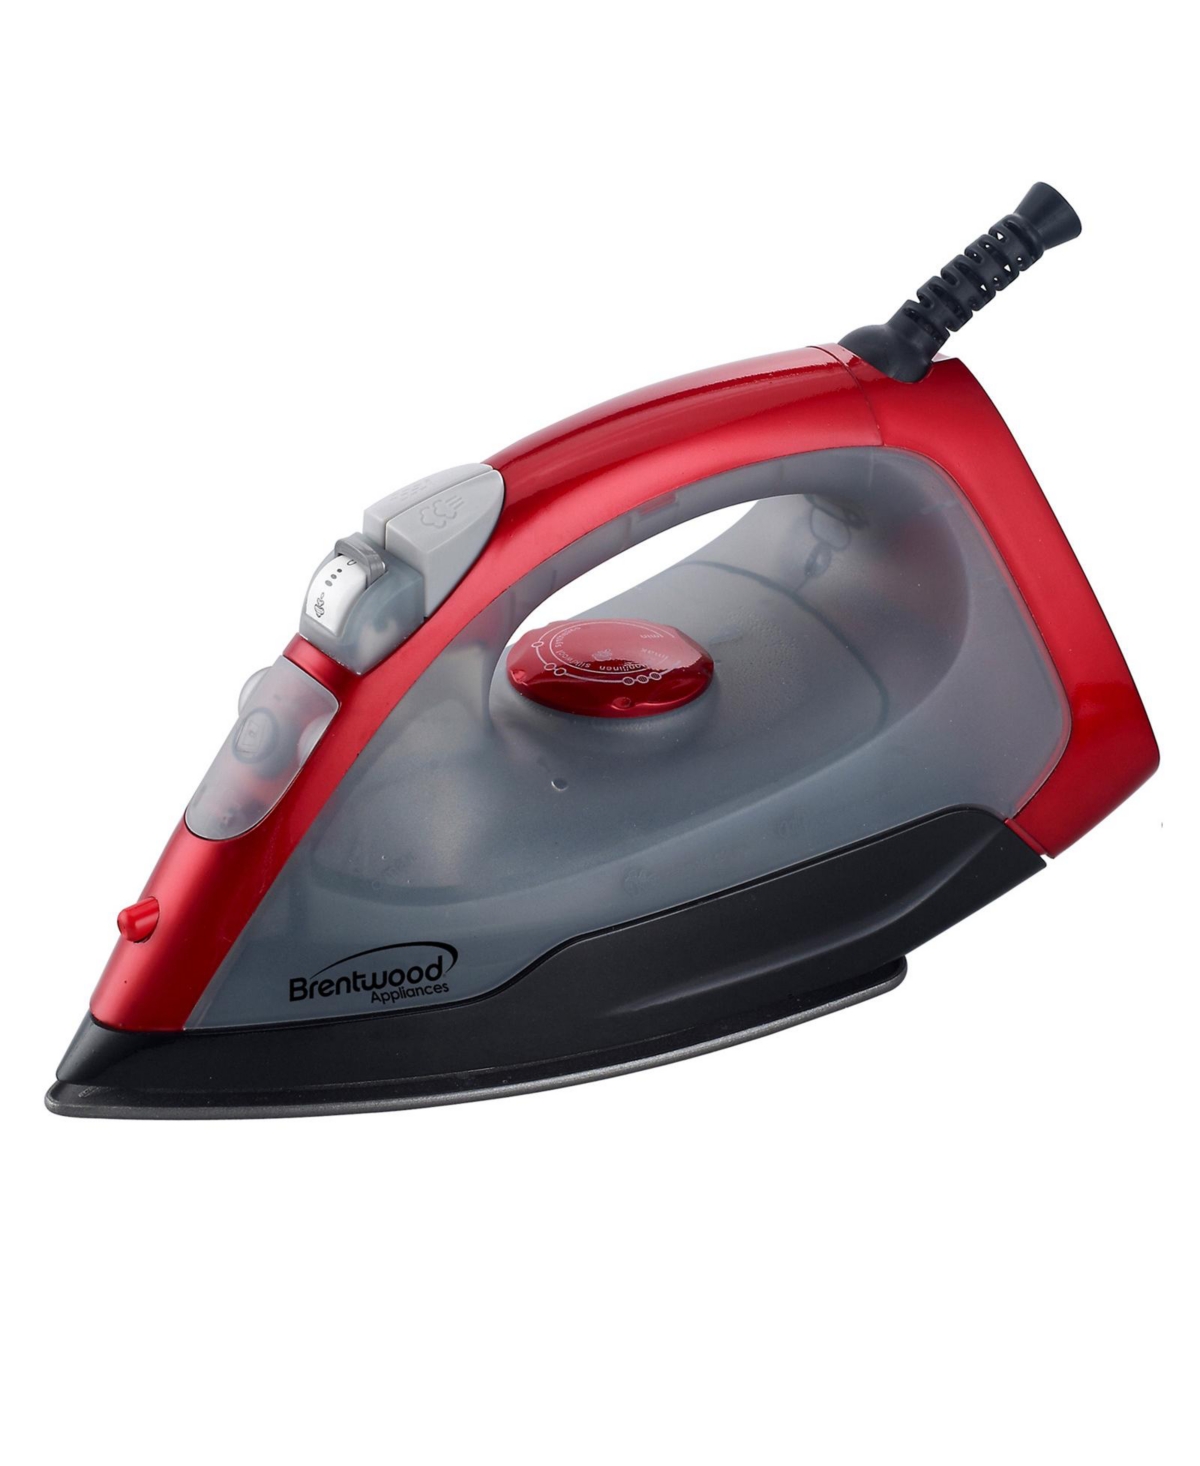 Brentwood Full Size Steam / Spray / Dry Iron in Red and Gray - Red